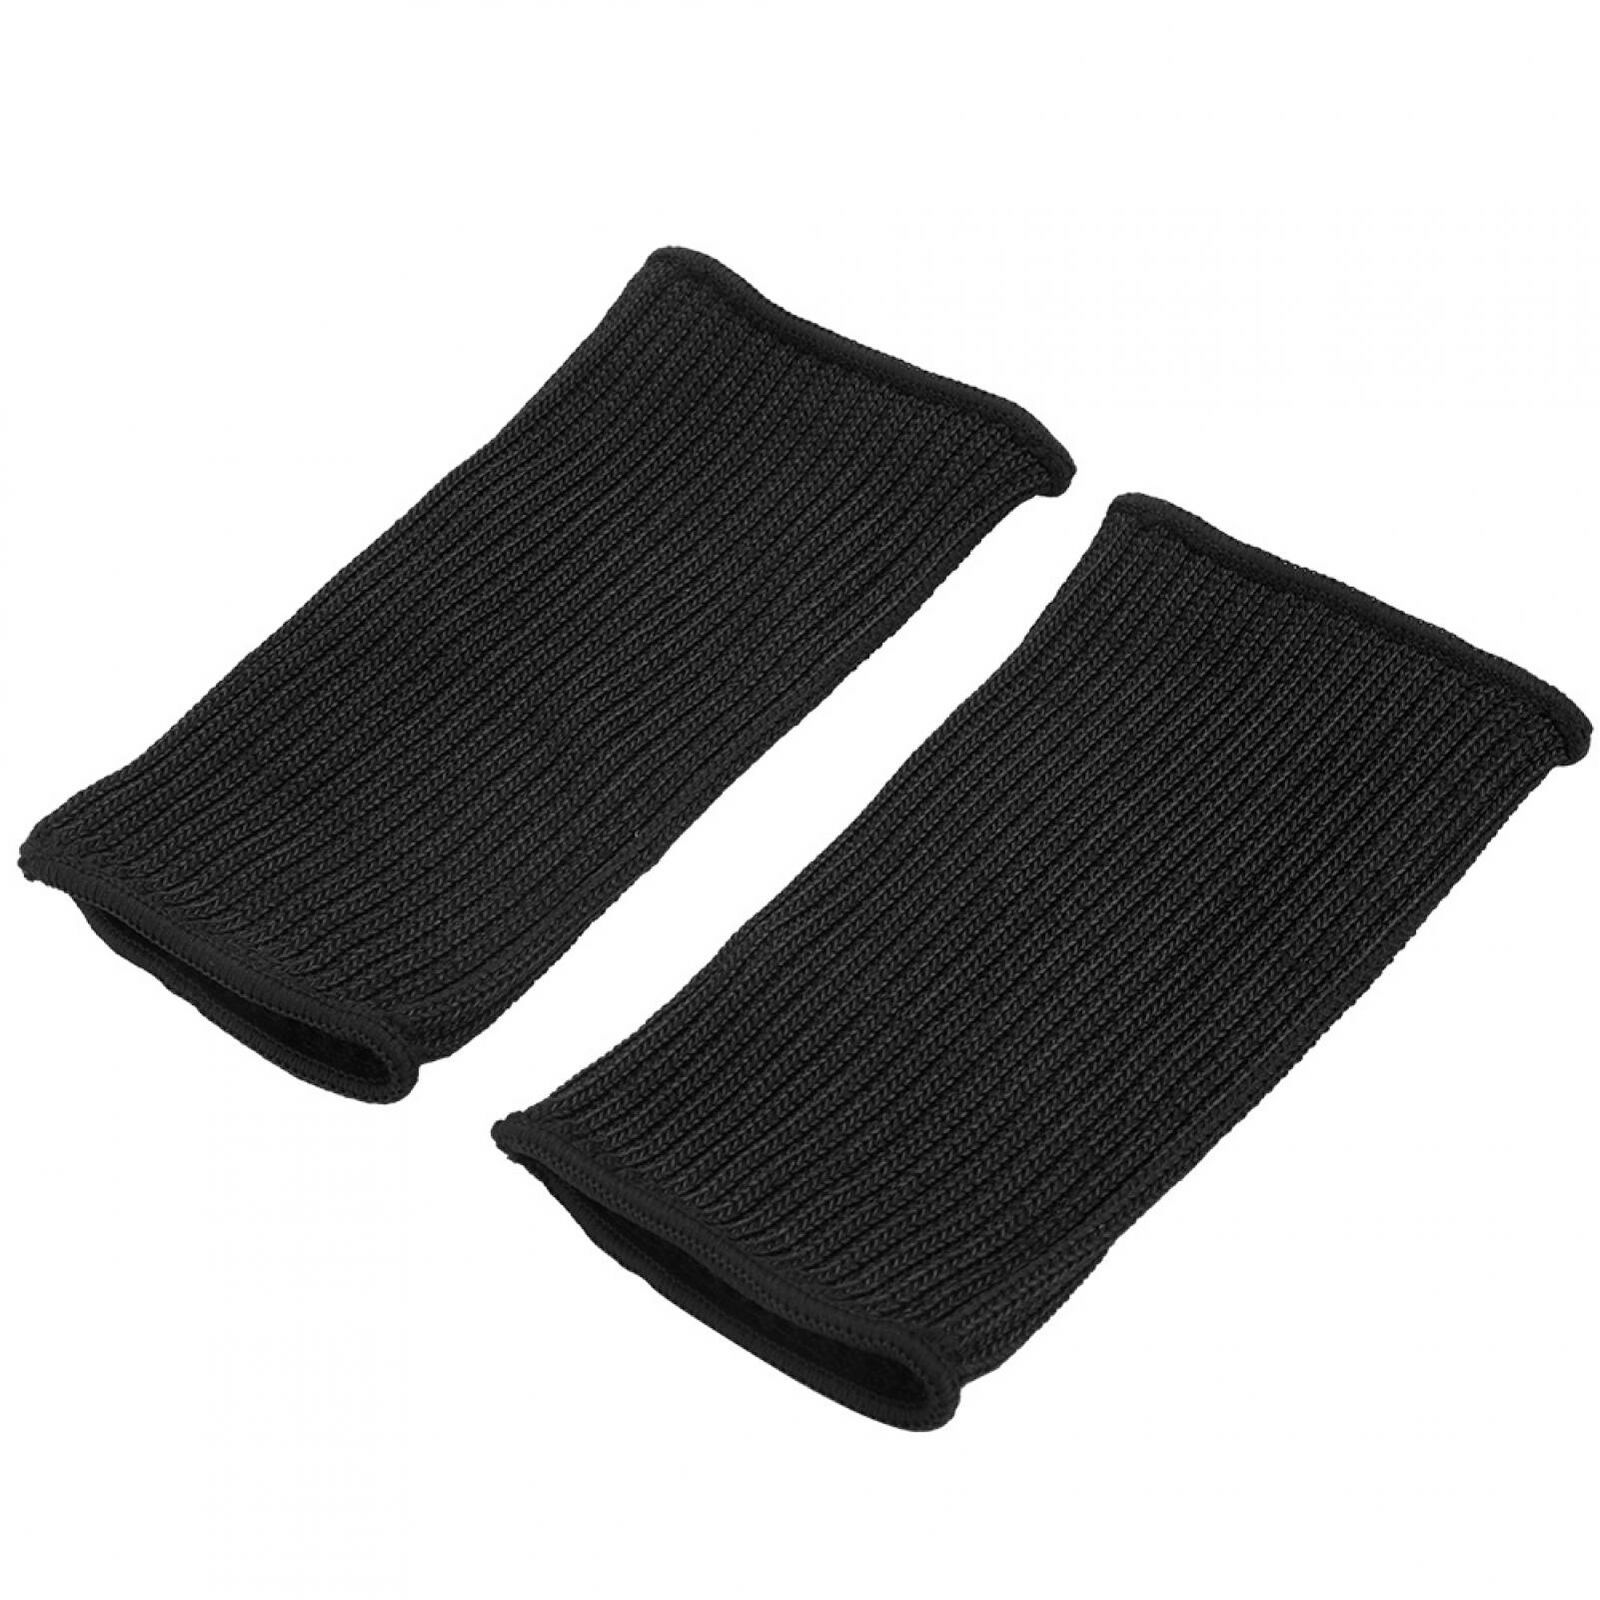 1 Pair Cut-resistant Sleeves Anti-cut Arm Guard Cutting Scratching Protection